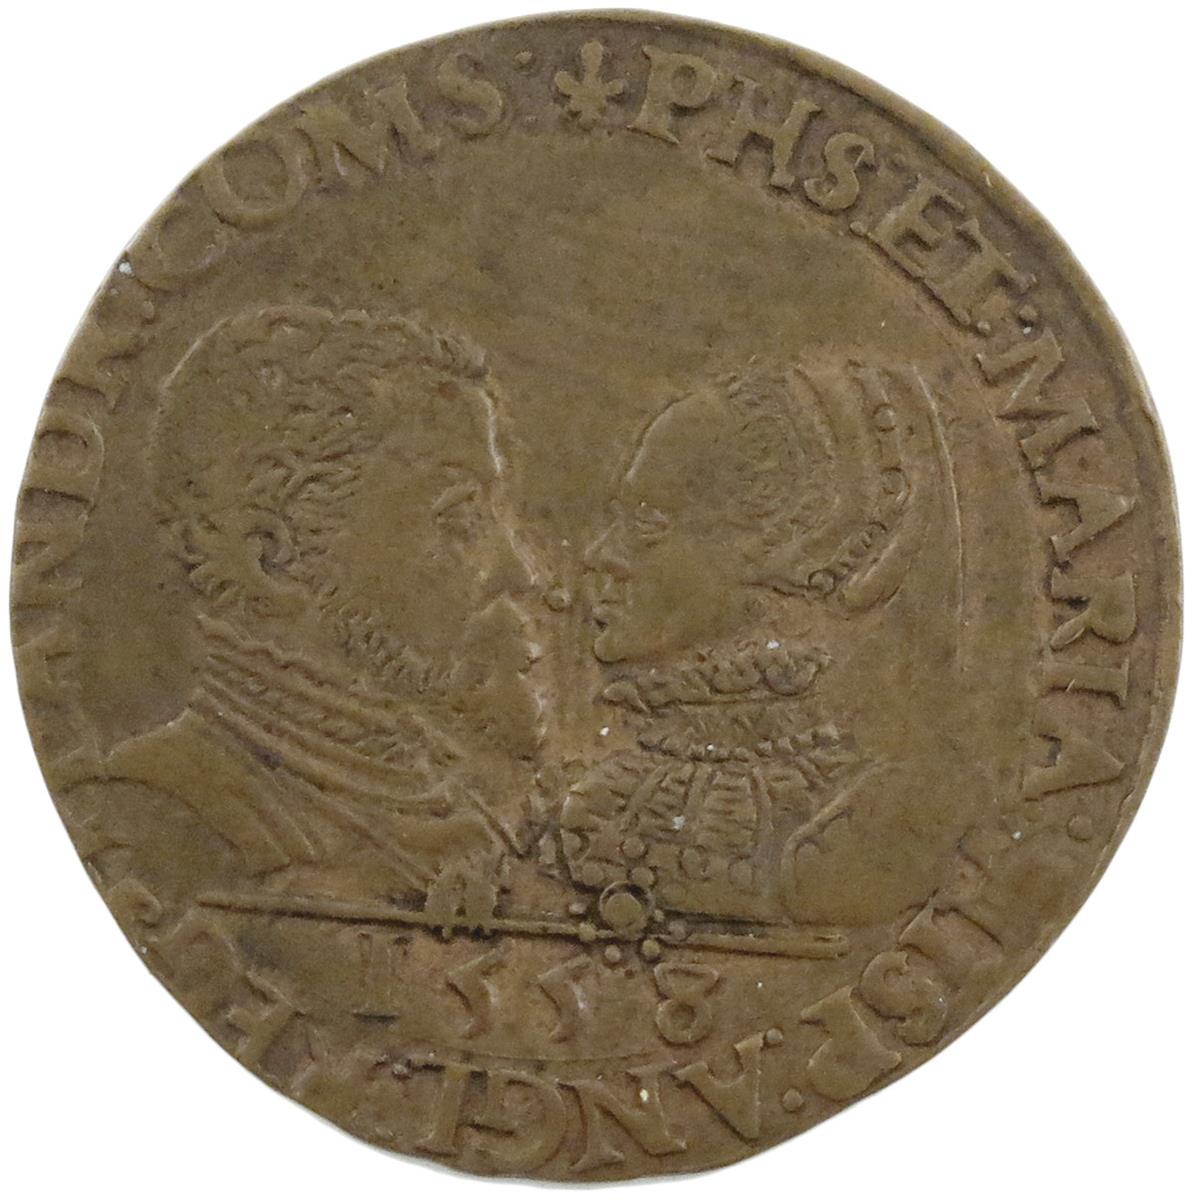 Philip II of Spain and Queen Mary, copper counter, 1557/58, coin-like portrait busts vis-à-vis,